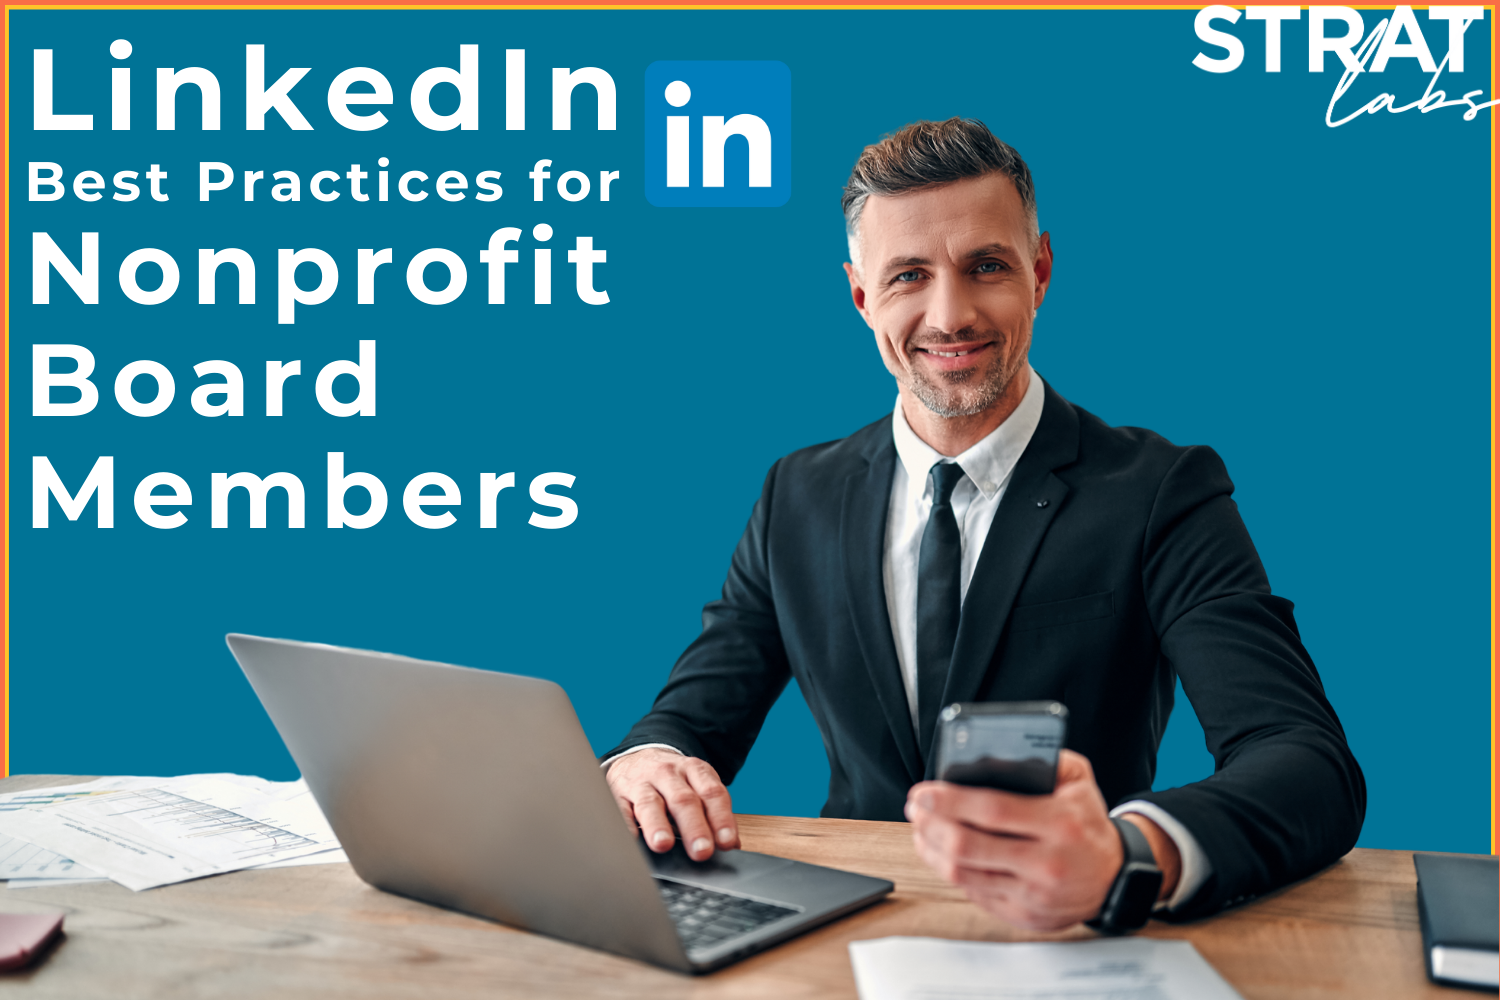 LinkedIn Best Practices for Nonprofit Board Members